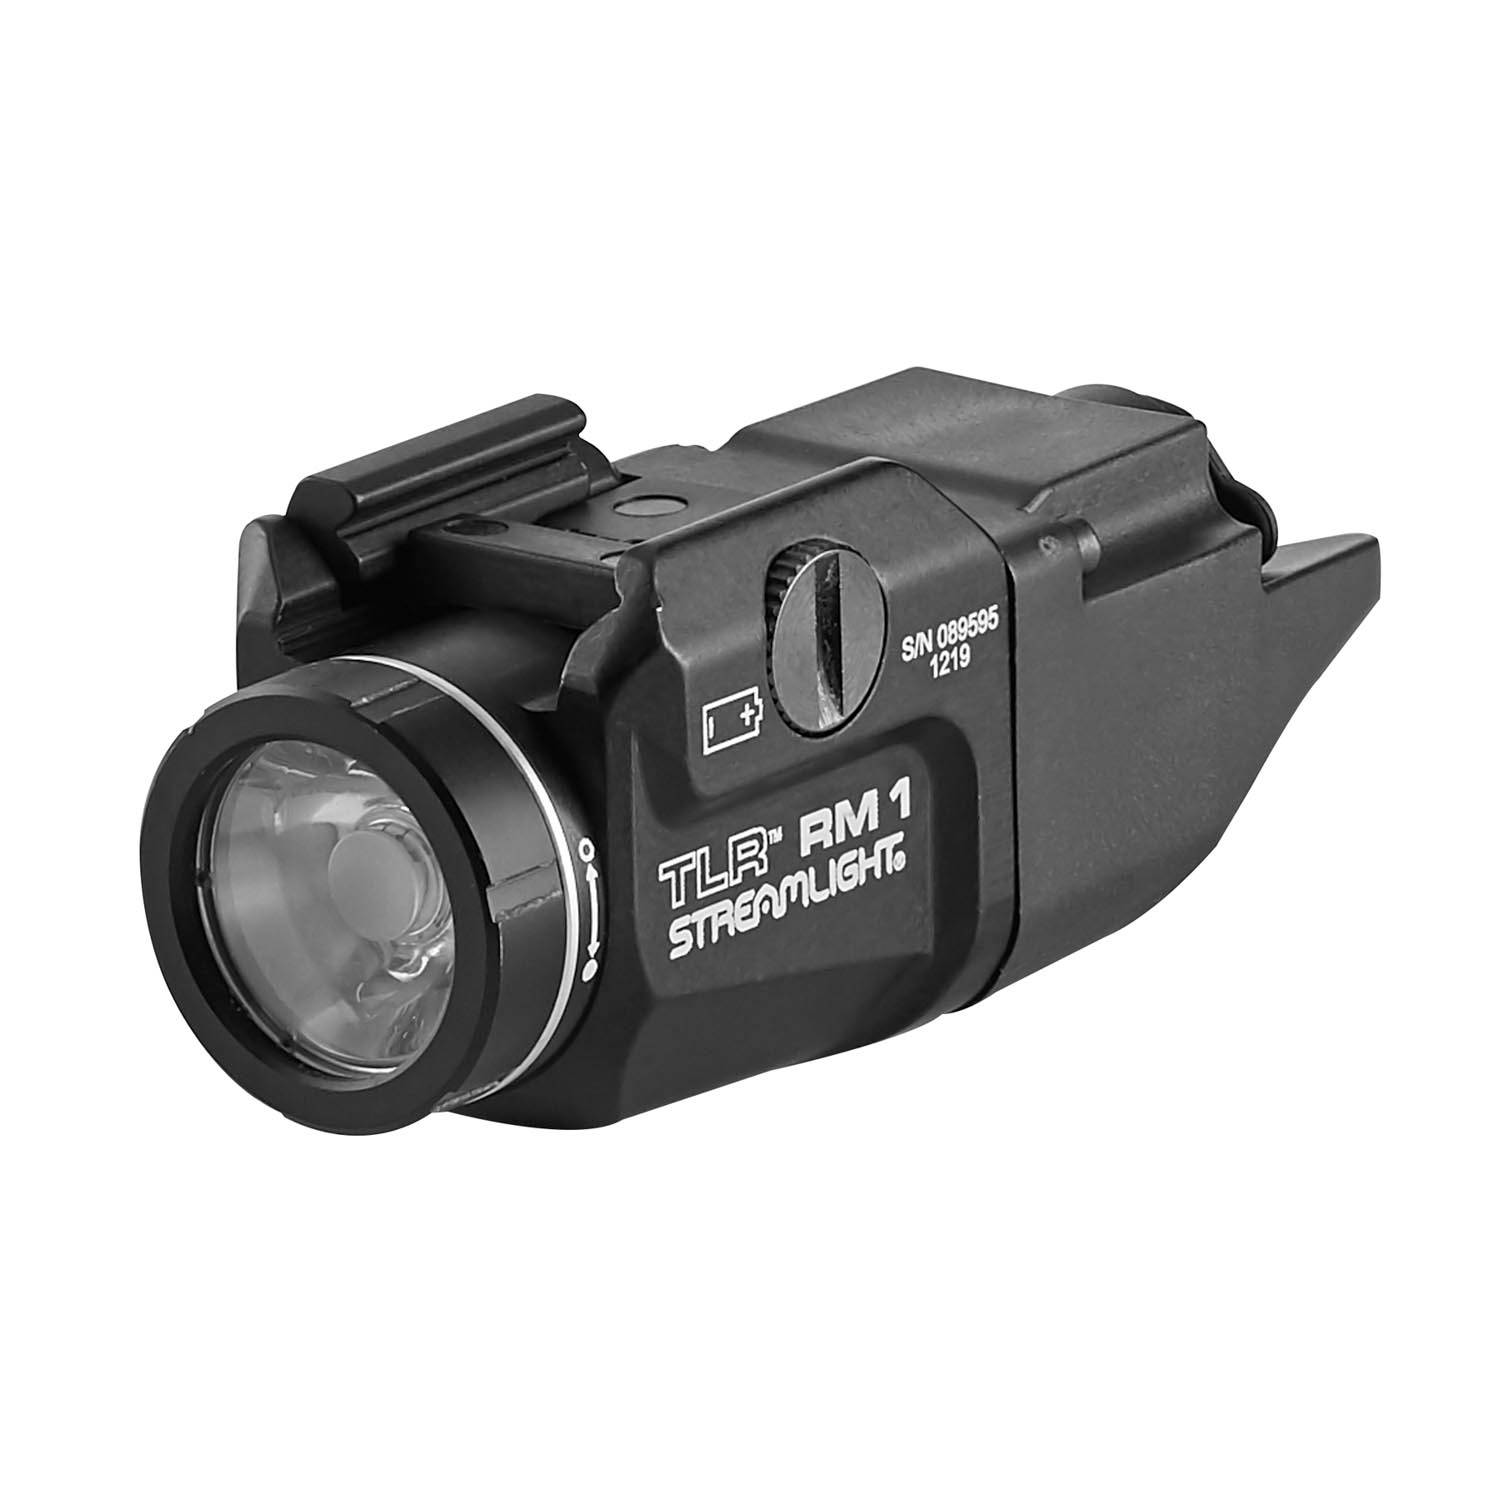 Streamlight TLR RM 1 Compact Tactical Lighting System